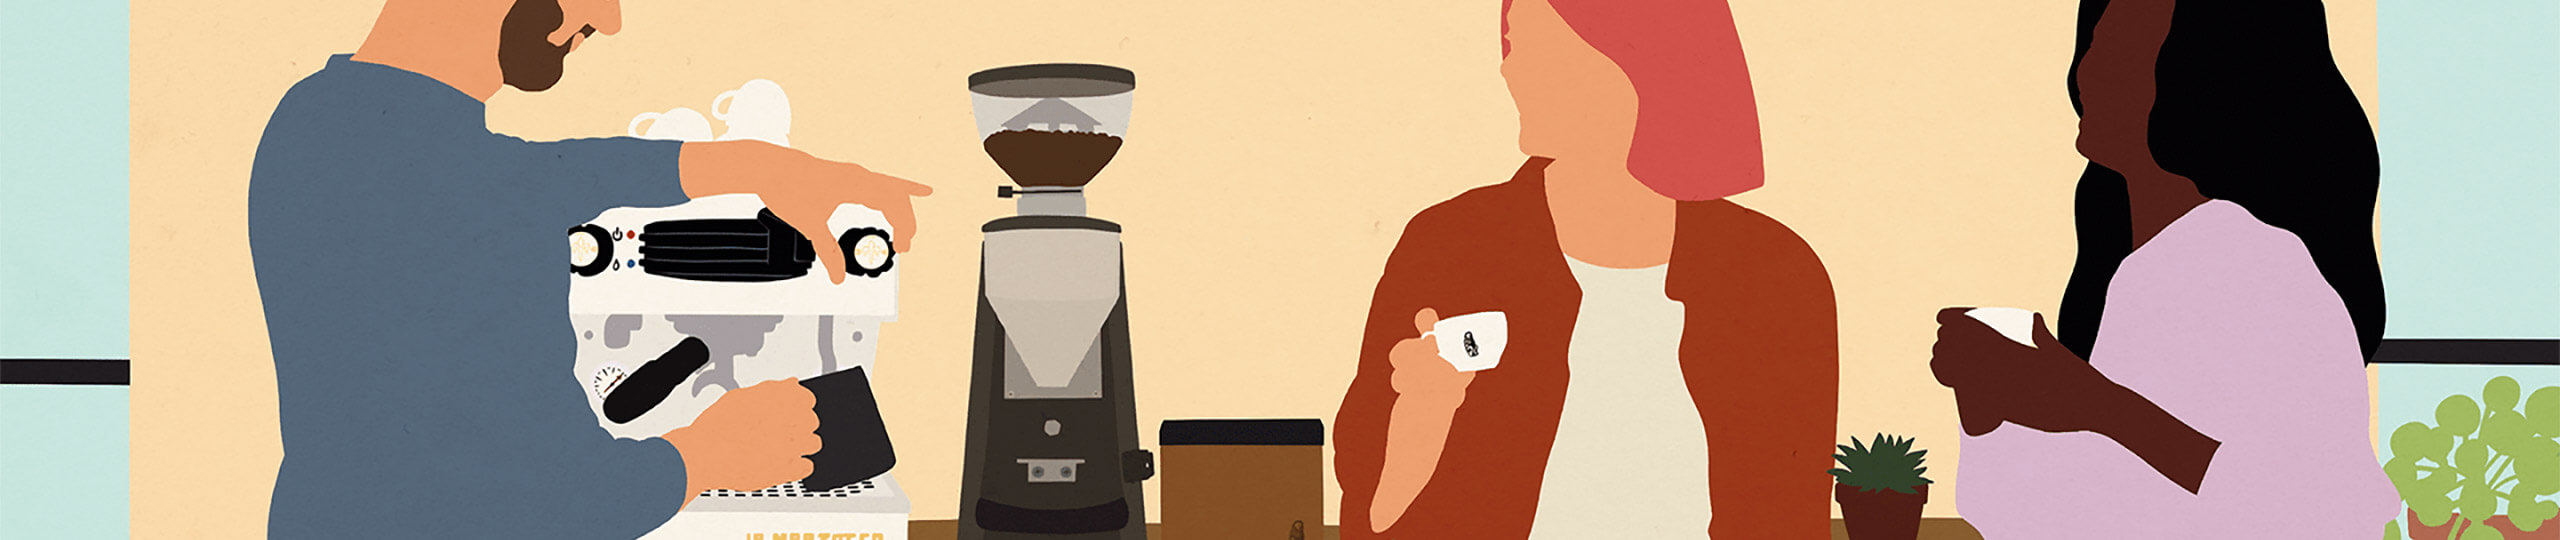 Painting of a man steaming milk on a one group espresso machine. Next to him an espresso grinder and a knock box, and two women talking and drinking espresso. ?>